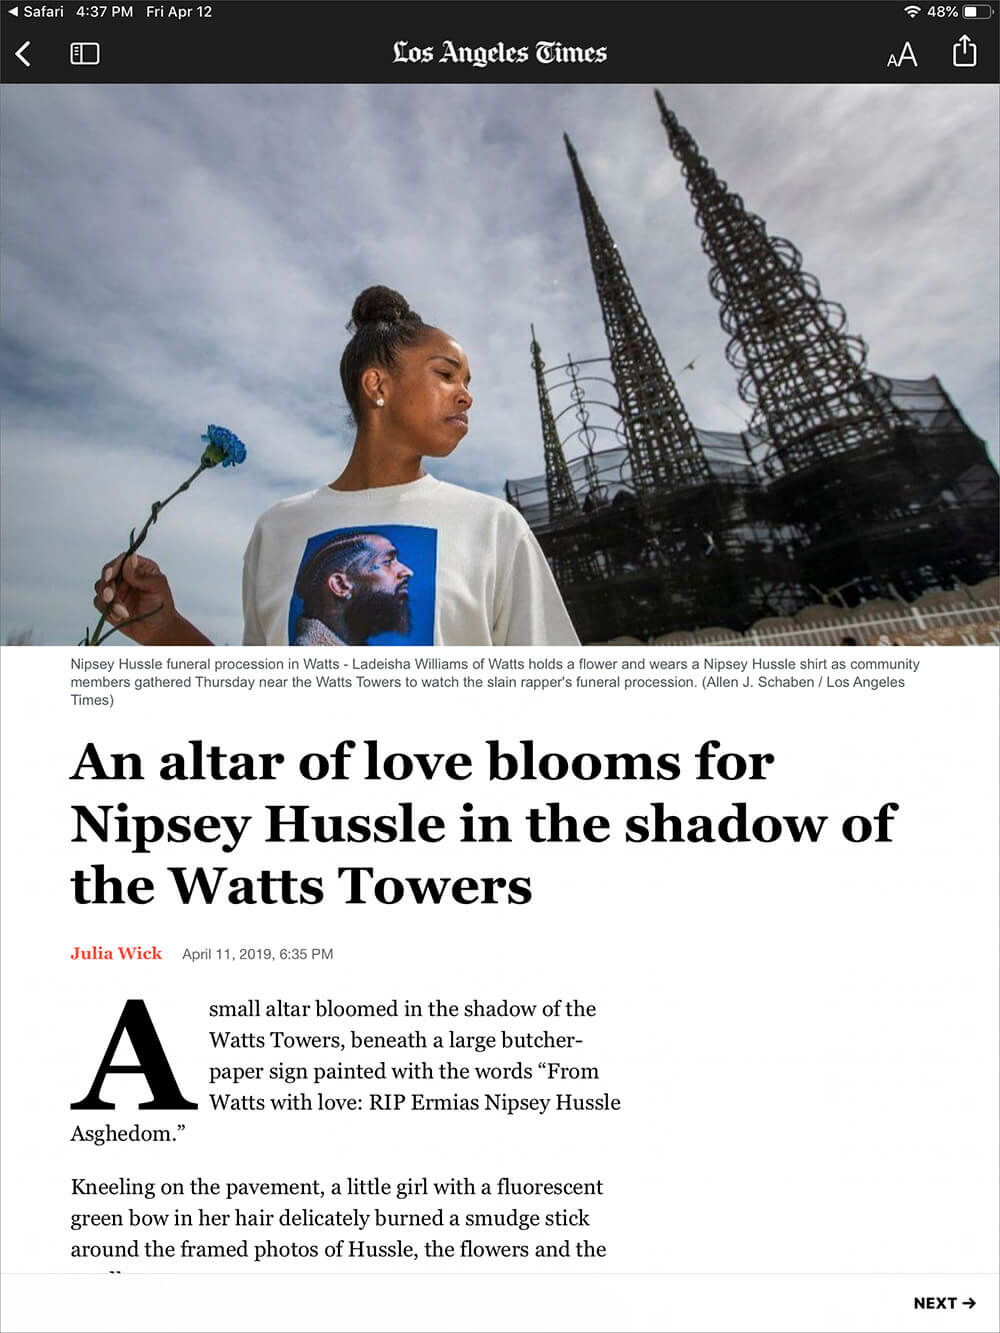 Read Paywalled Article From WSJ or LA Times Using Apple News Plus